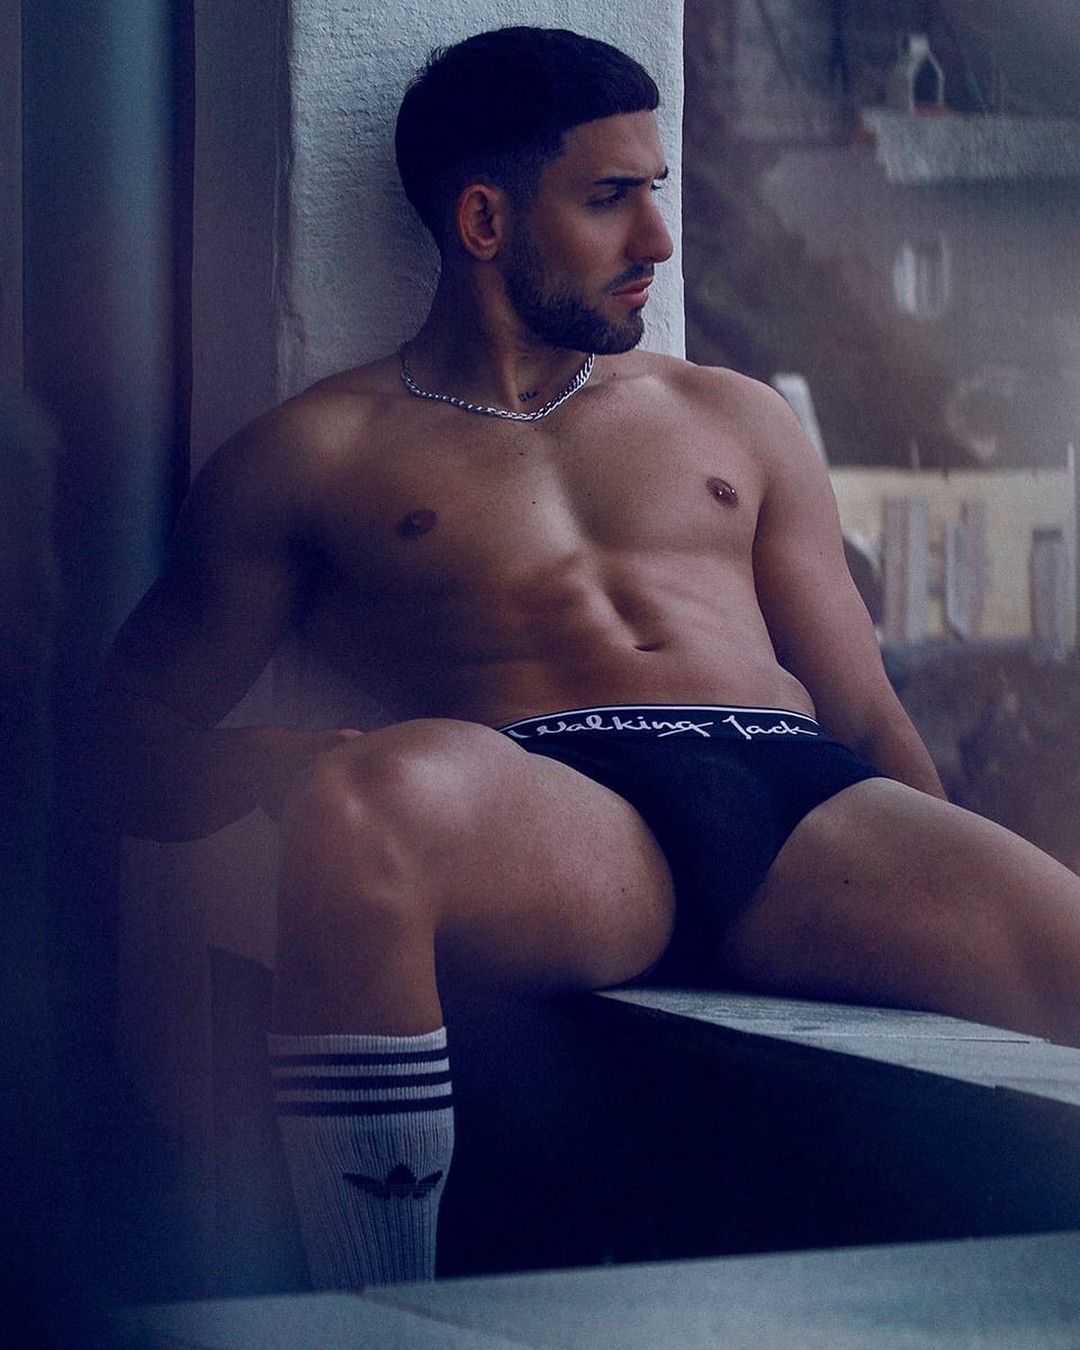 Model Gonzalo is the star of the new editorial by Adrian C. Martin featuring underwear from various brands. Check out the first part:
____
http://www.menandunderwear.com/2022/01/model-gonzalo-by-adrian-c-martin-underwear-from-various-brands-part-one.html